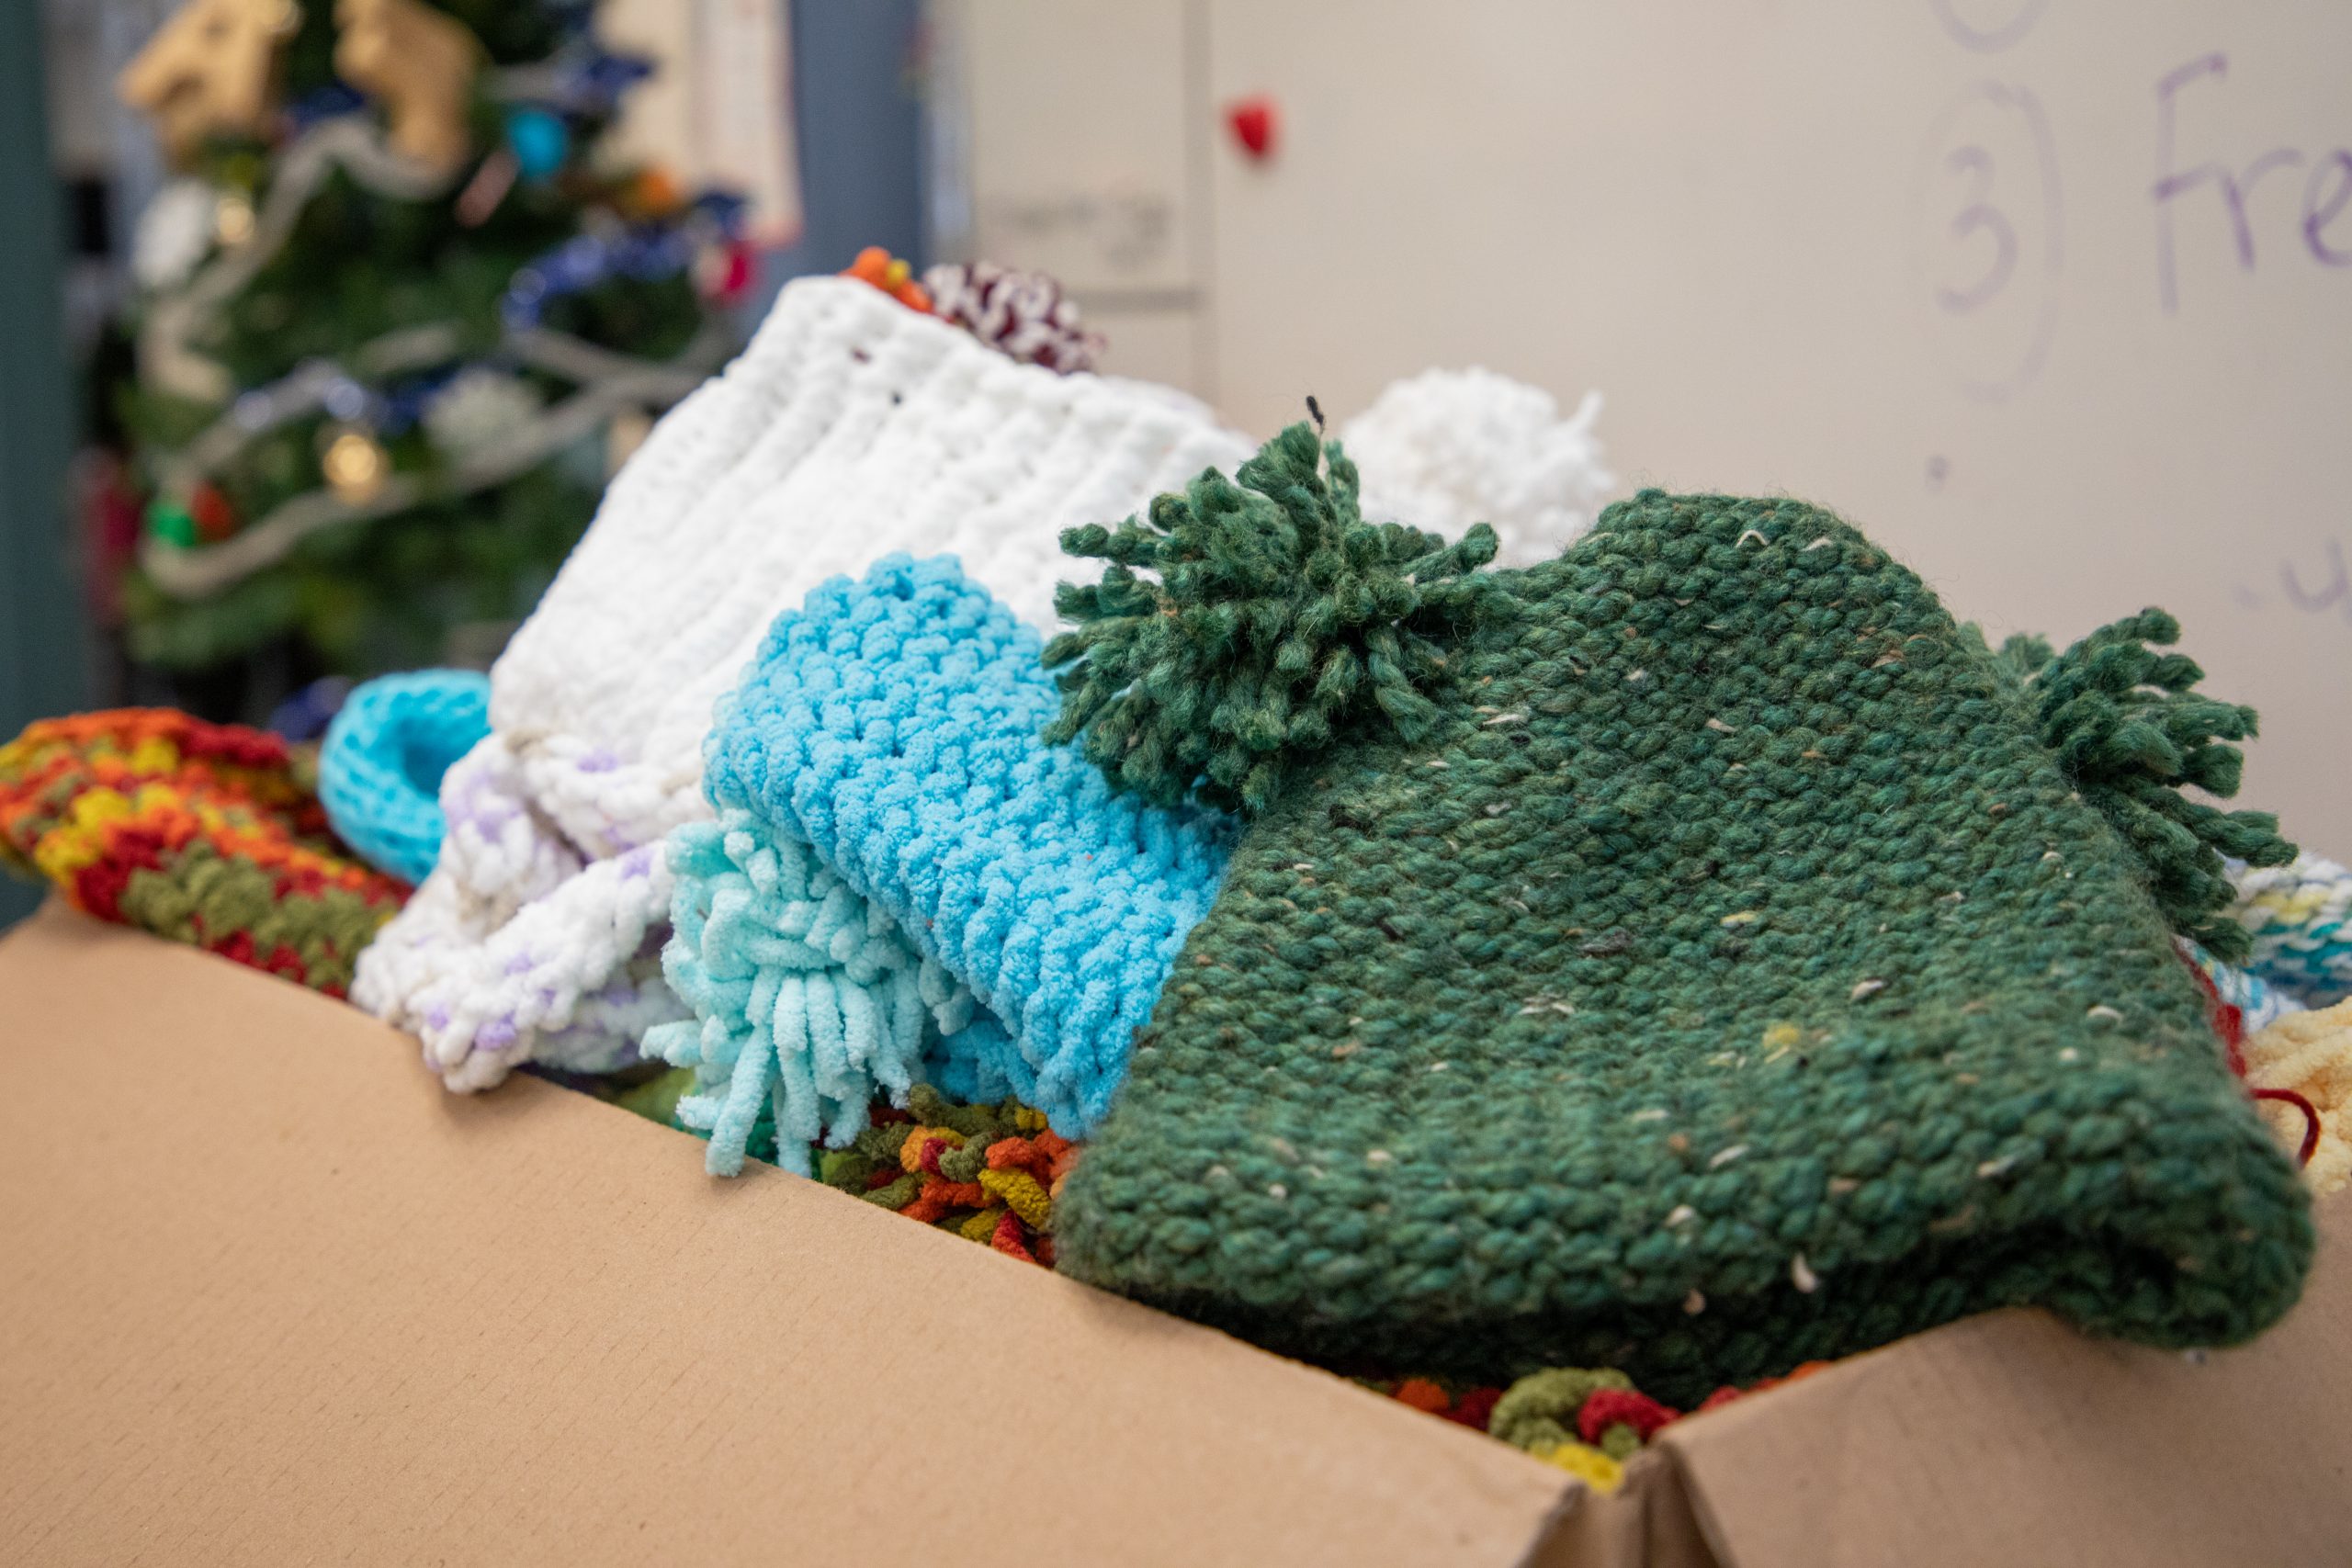 85 hats knitted by Laity View students for donation placed in a cardboard box.